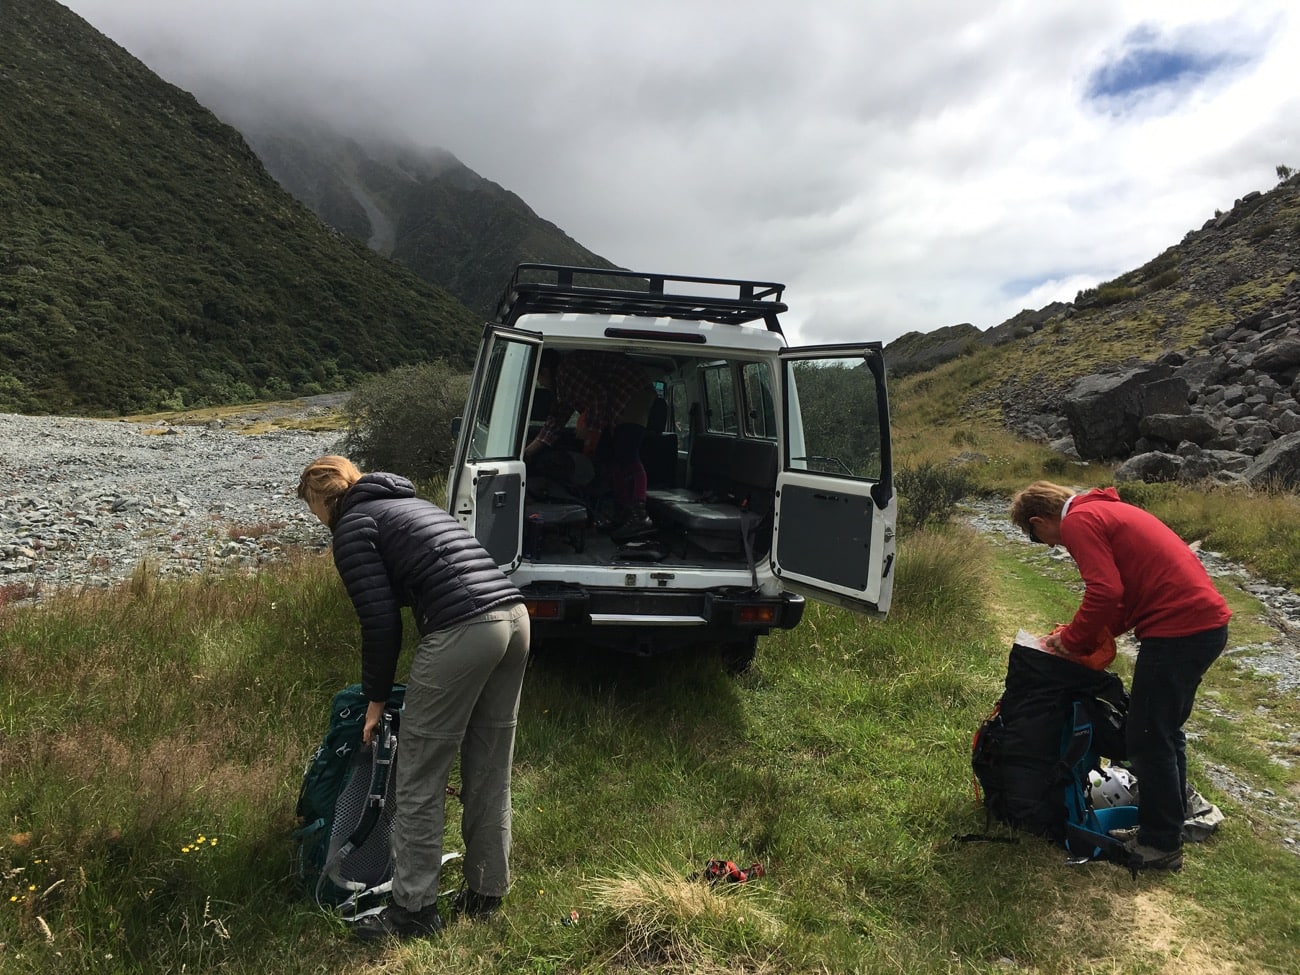 During my New Zealand trip, I took a 4-day intro to mountaineering course on Mount Cook with Alpine Recreation. We learned how to wear crampons, use an ice axe, and safely cross a glacier. Read my review and get the full details on the course. 